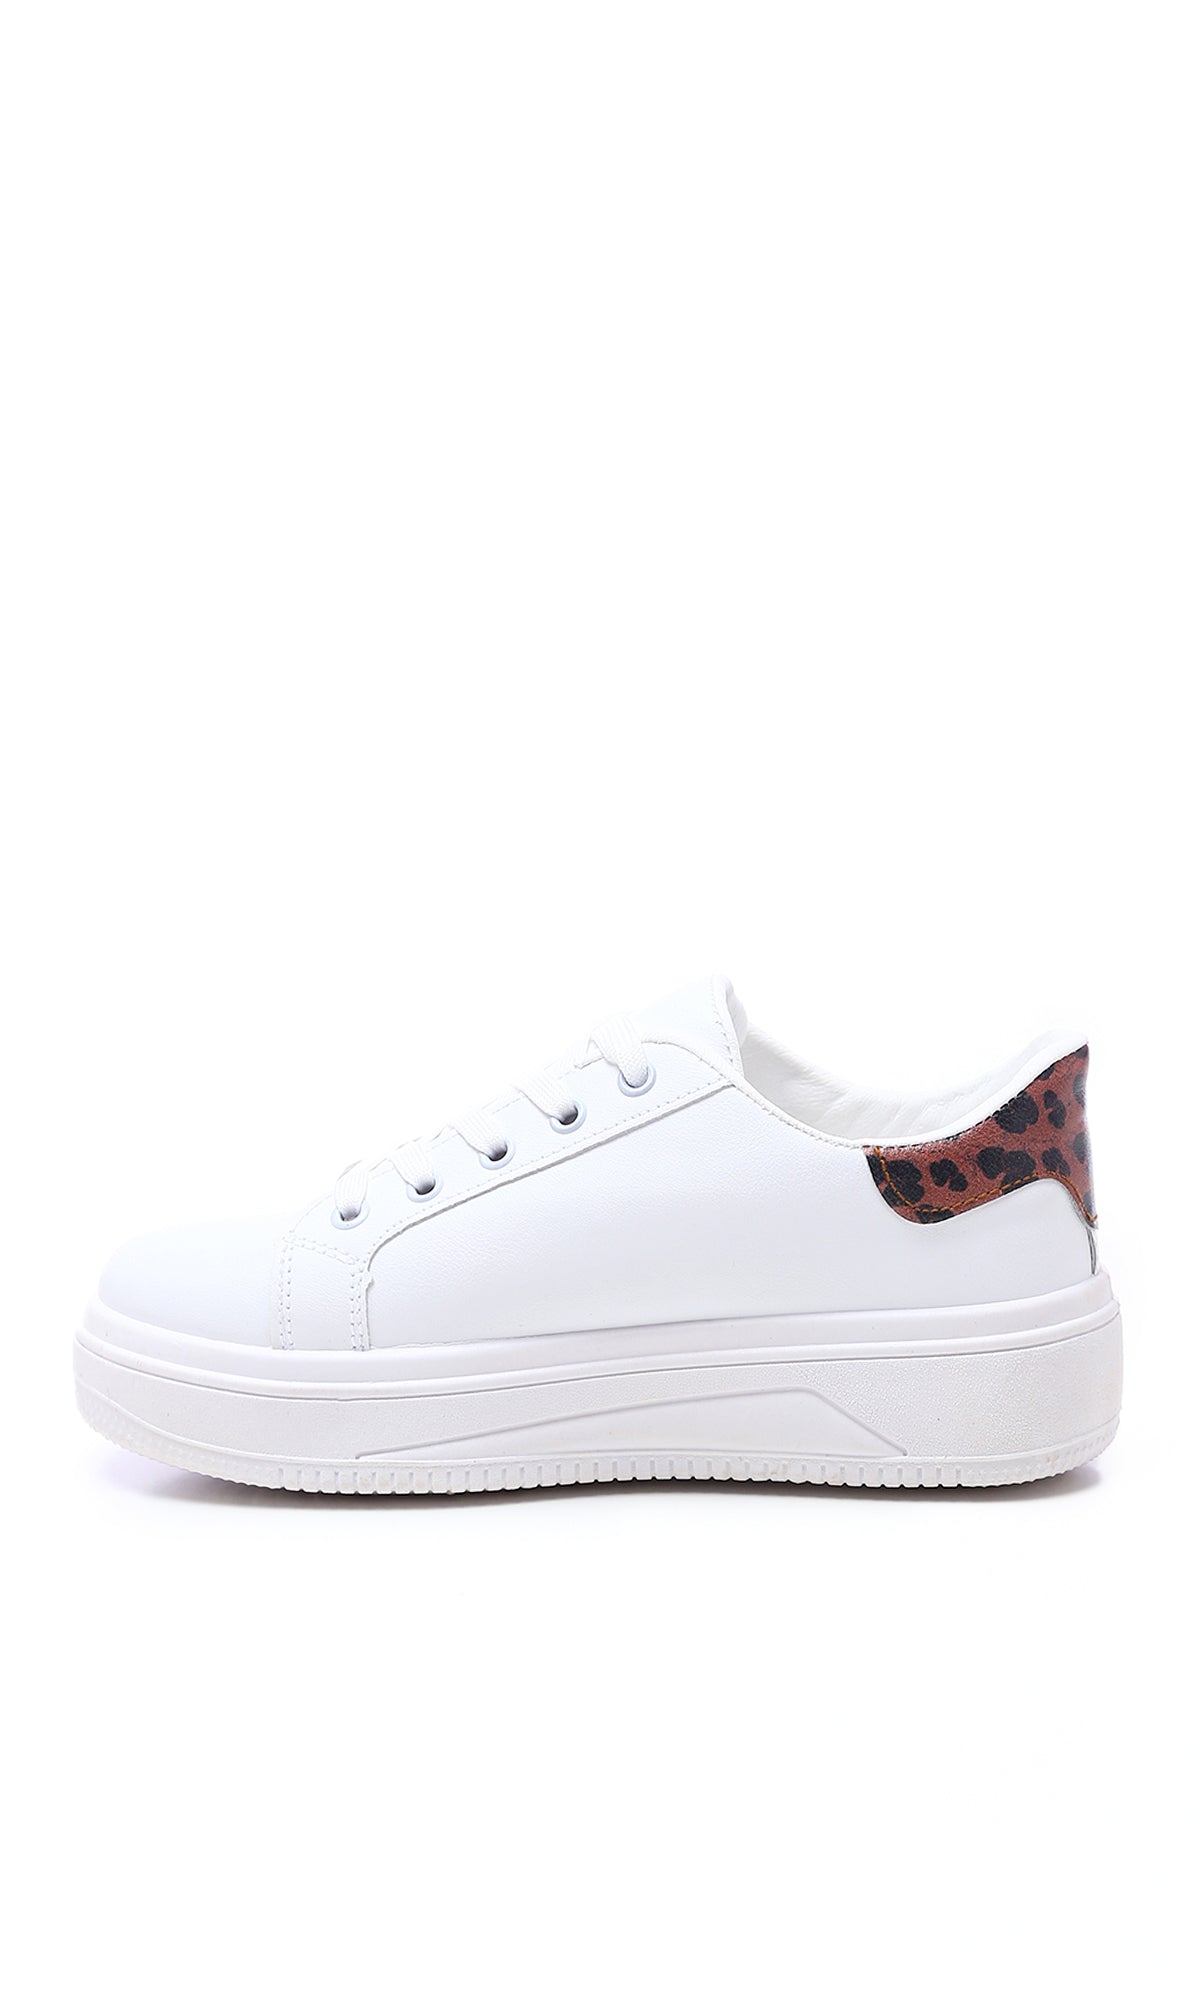 O177889 Round Toecap Sneakers With Leopard Back - White